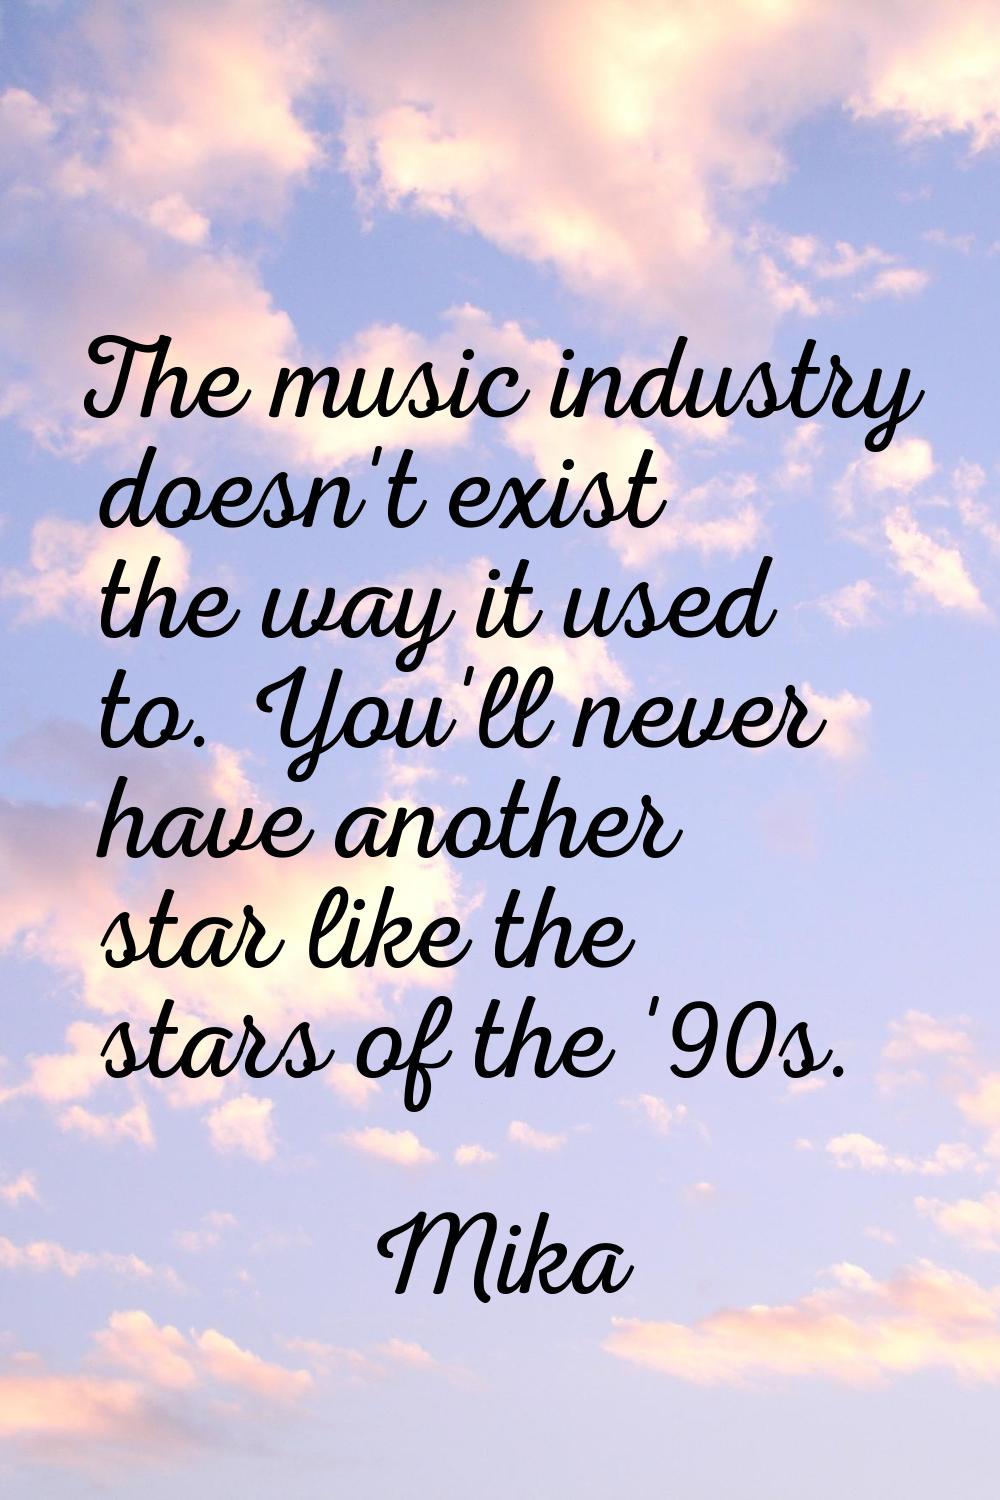 The music industry doesn't exist the way it used to. You'll never have another star like the stars 